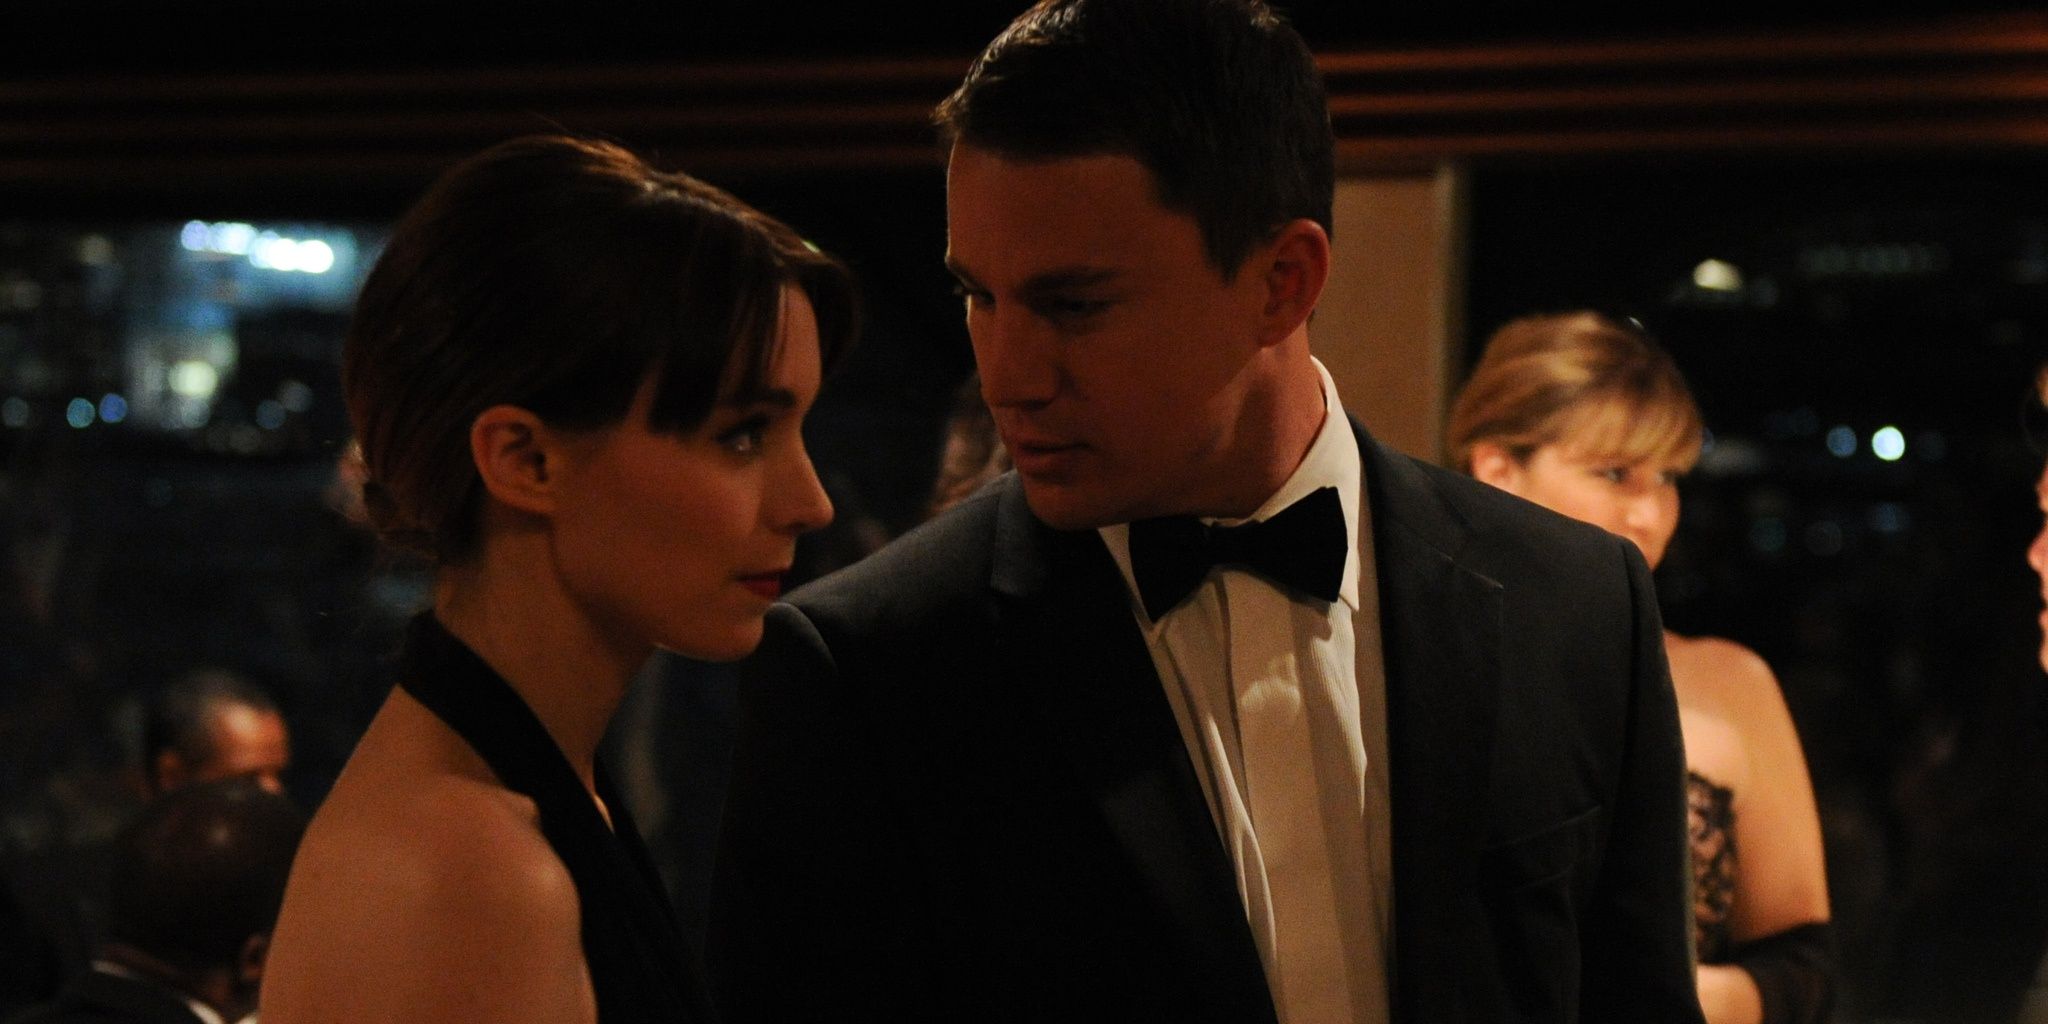 Channing Tatum and Rooney Mara wear fancy clothes at a party in Side Effects